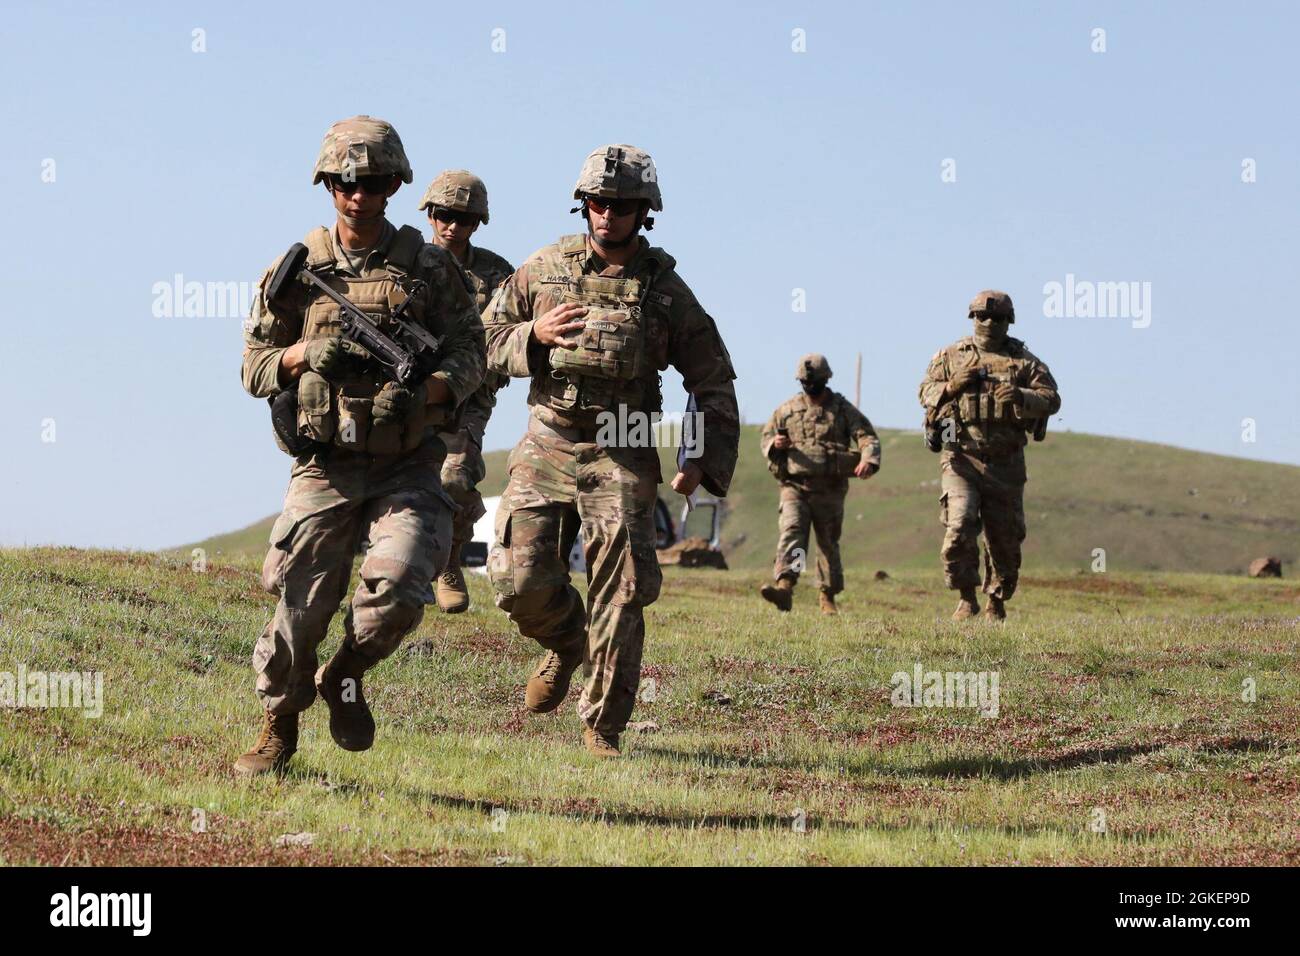 U.S. Army Spc. Alex Hammack of the California National Guard’s Delta Company, 1st Battalion, 184th Infantry Regiment, 79th Infantry Brigade Combat Team, carries an M320 grenade launcher and runs to a firing position along with range cadre, safety and scorers April 1, 2021 during Cal Guard's 2021 Best Warrior Competition at Camp San Luis Obispo. Stock Photo